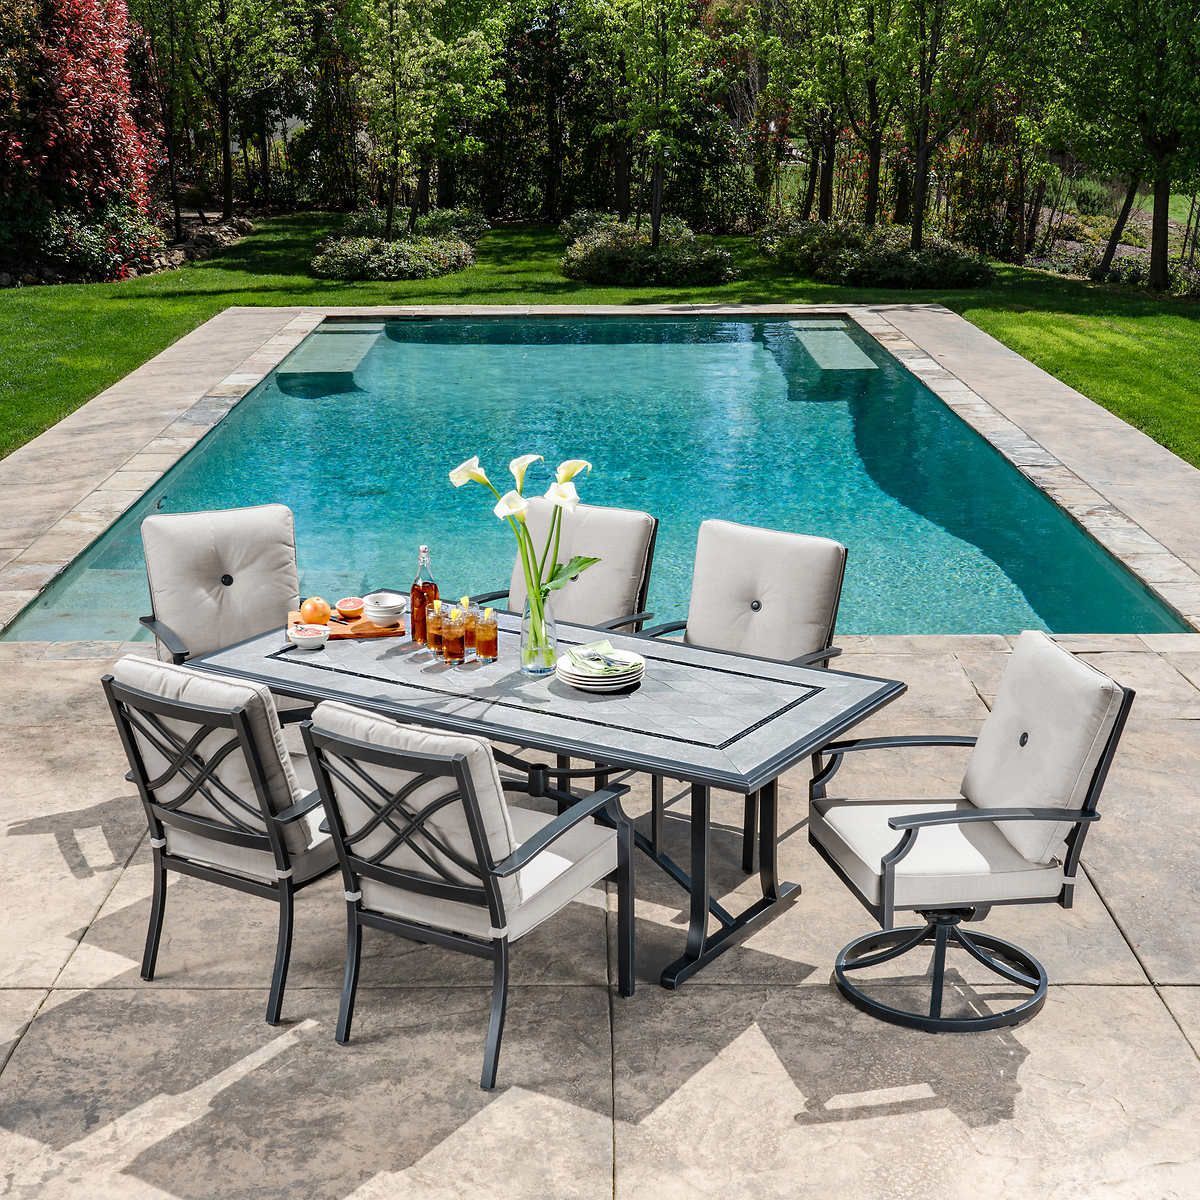 Hamilton 7 Piece Cushion Dining Set In 2020 | Dining Set, Rectangular For 7 Piece Rectangular Patio Dining Sets (View 10 of 15)